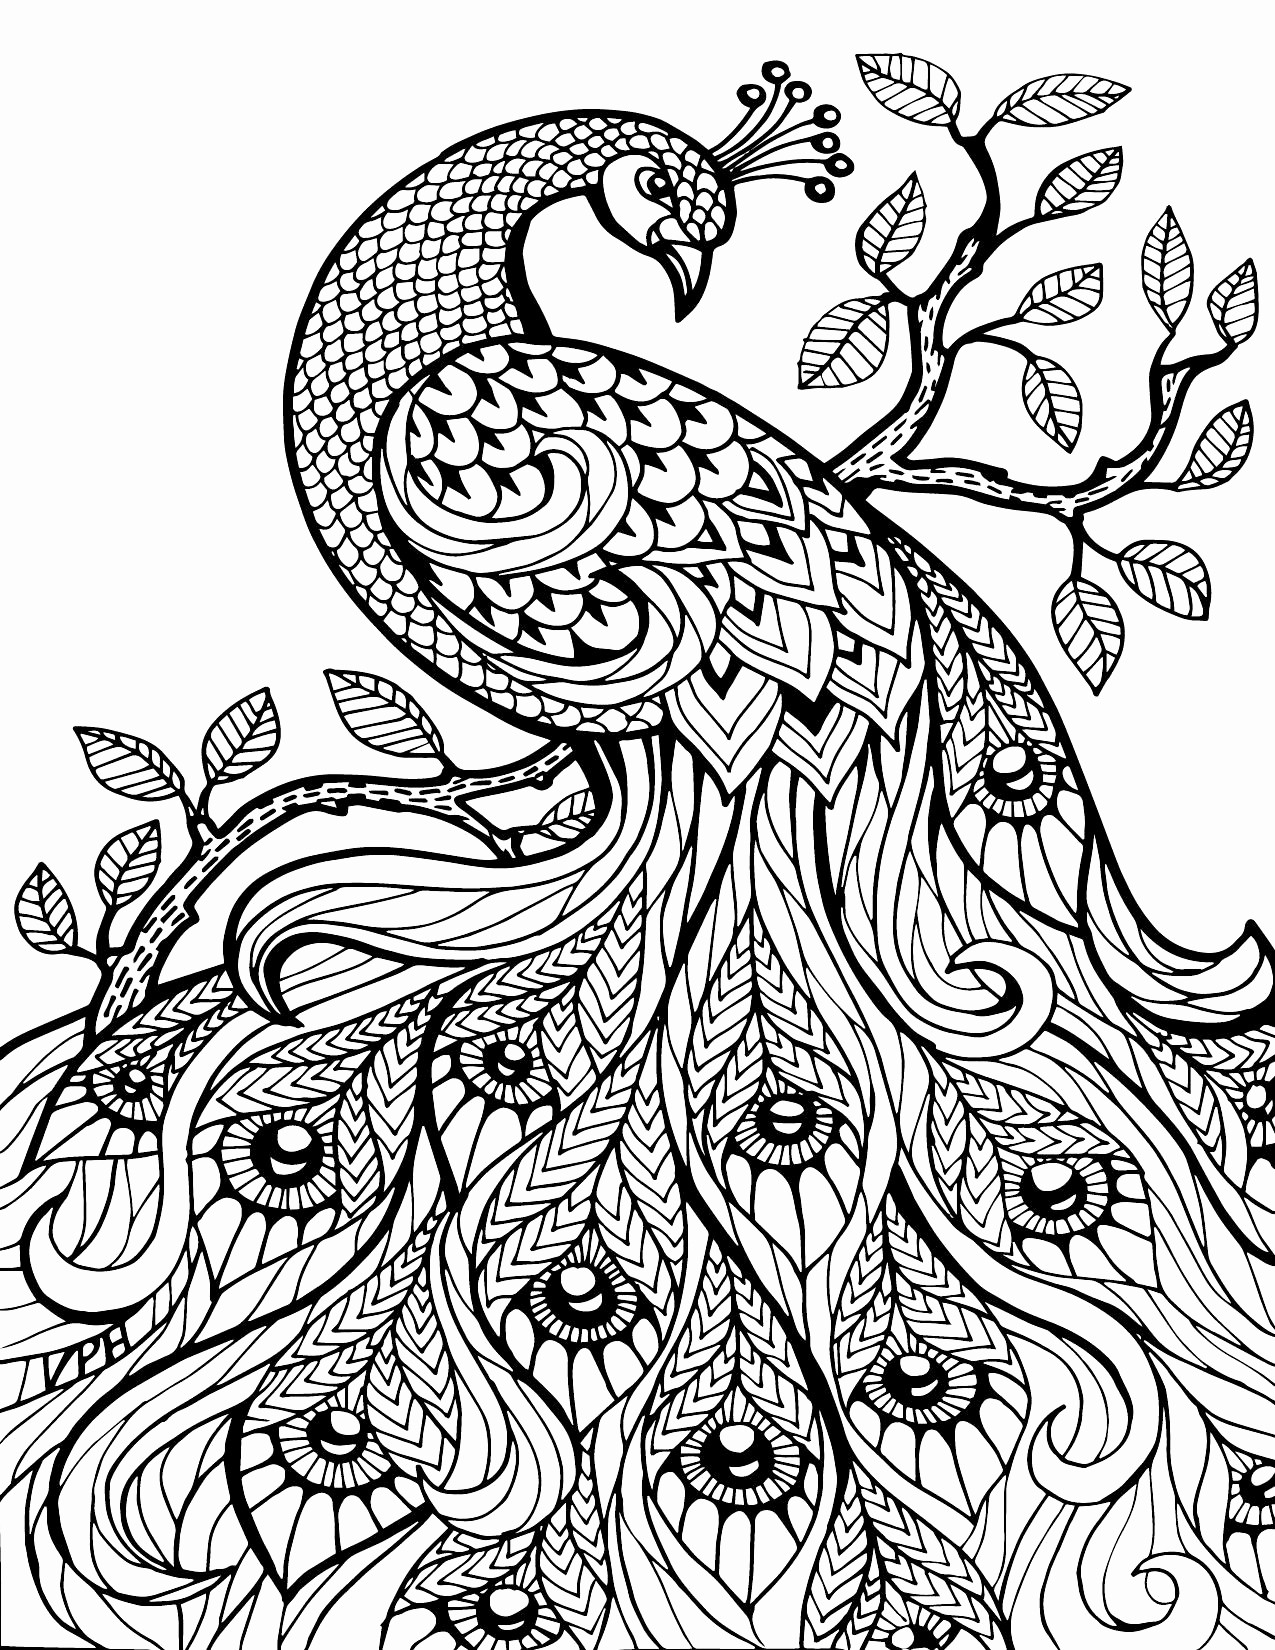 Free Printable Coloring Pages Fairies Adults Fairy Coloring Books Inspirational Fairy Coloring Pages For Adults